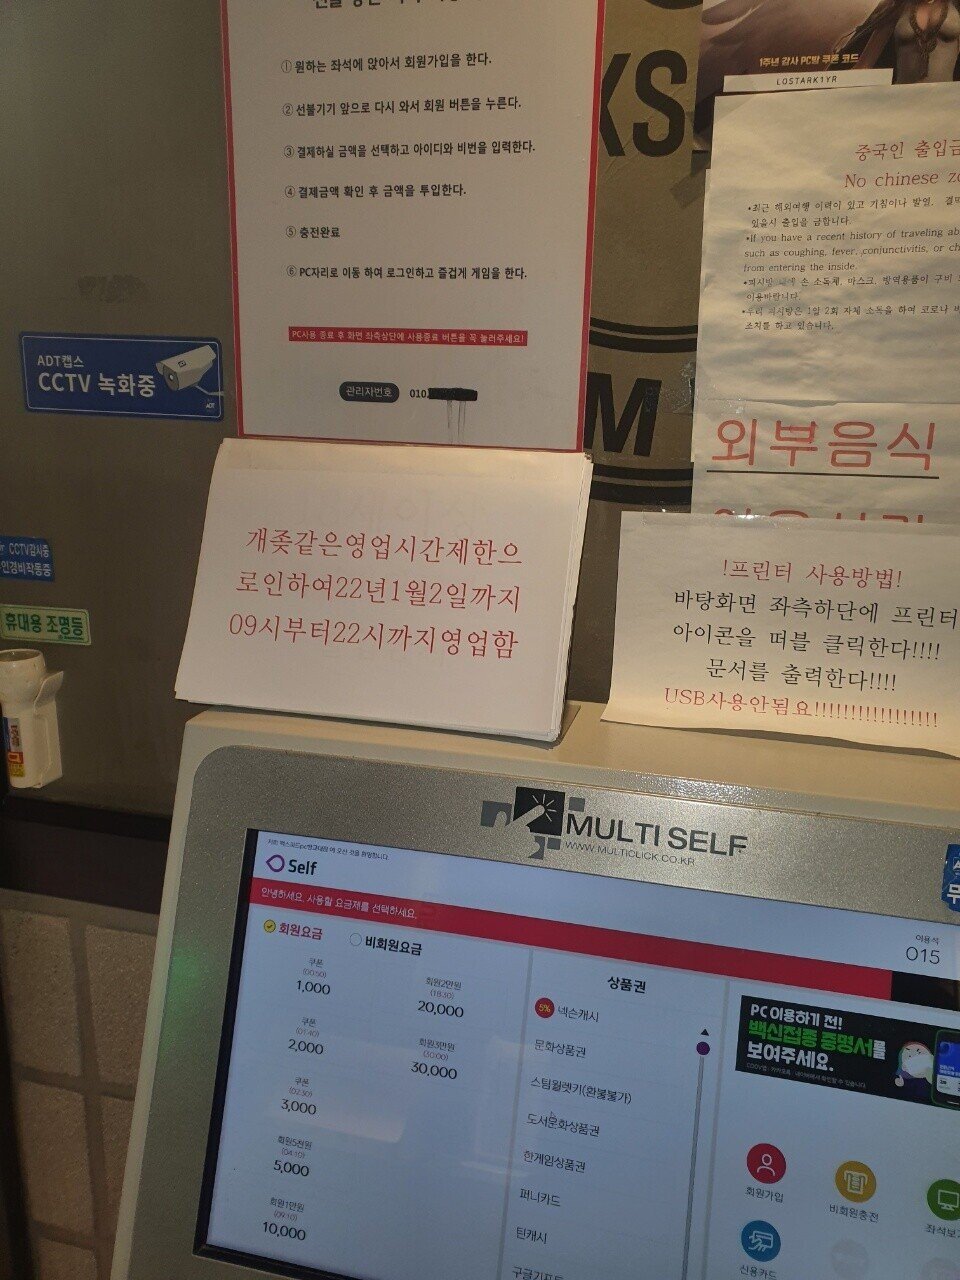 The owner of the internet cafe is so angry.